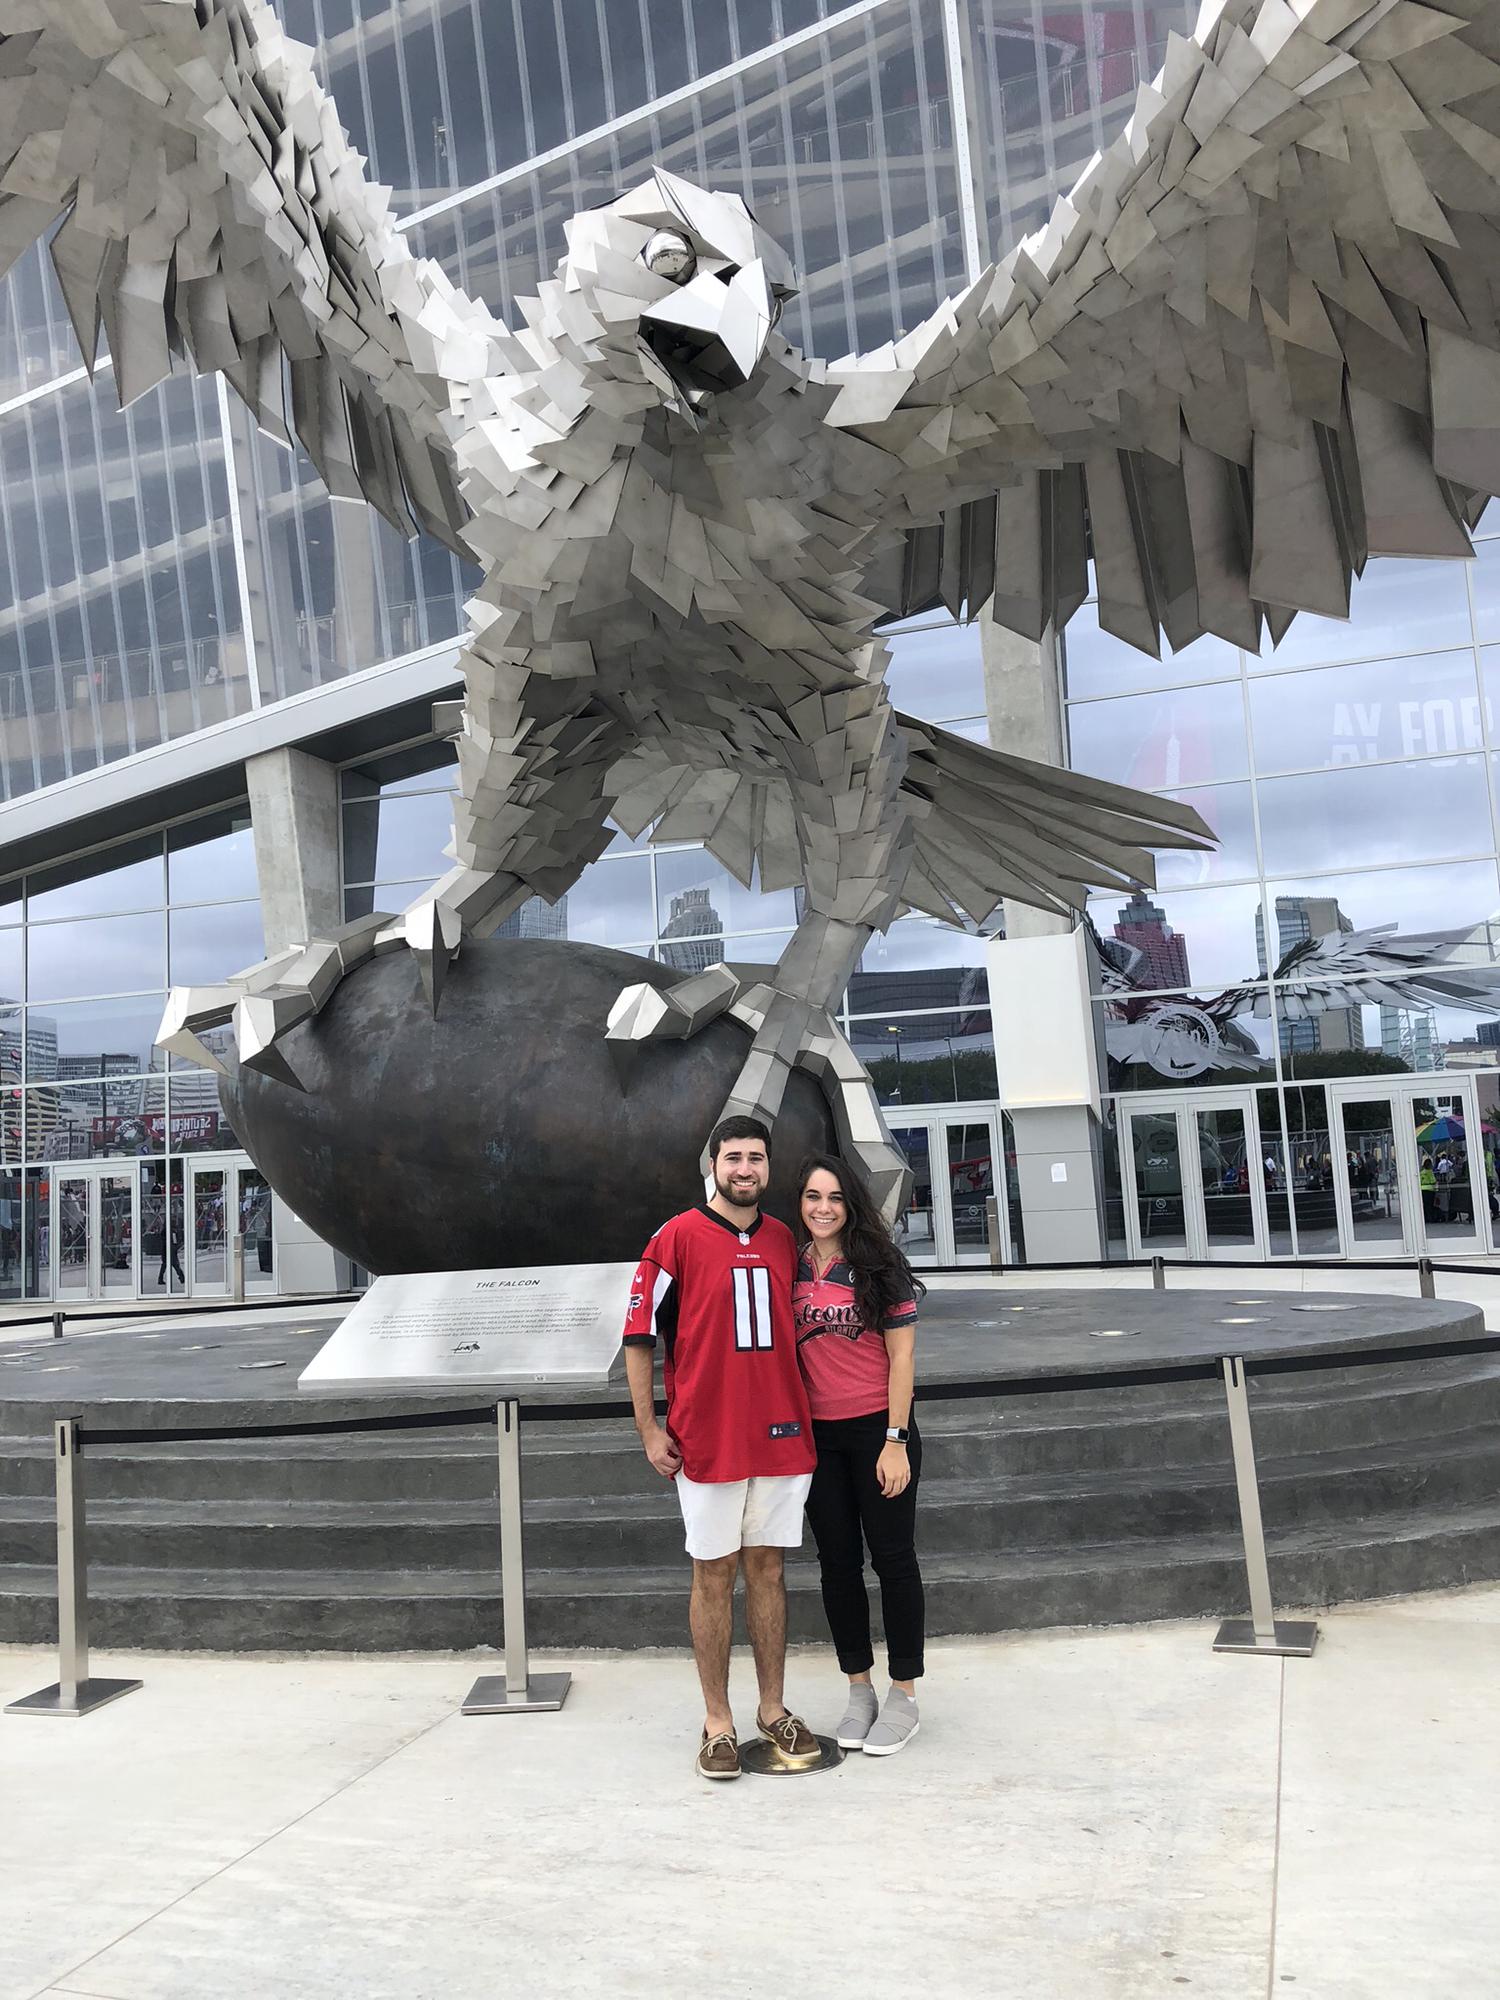 First Falcons’s game together.
Nov 2019